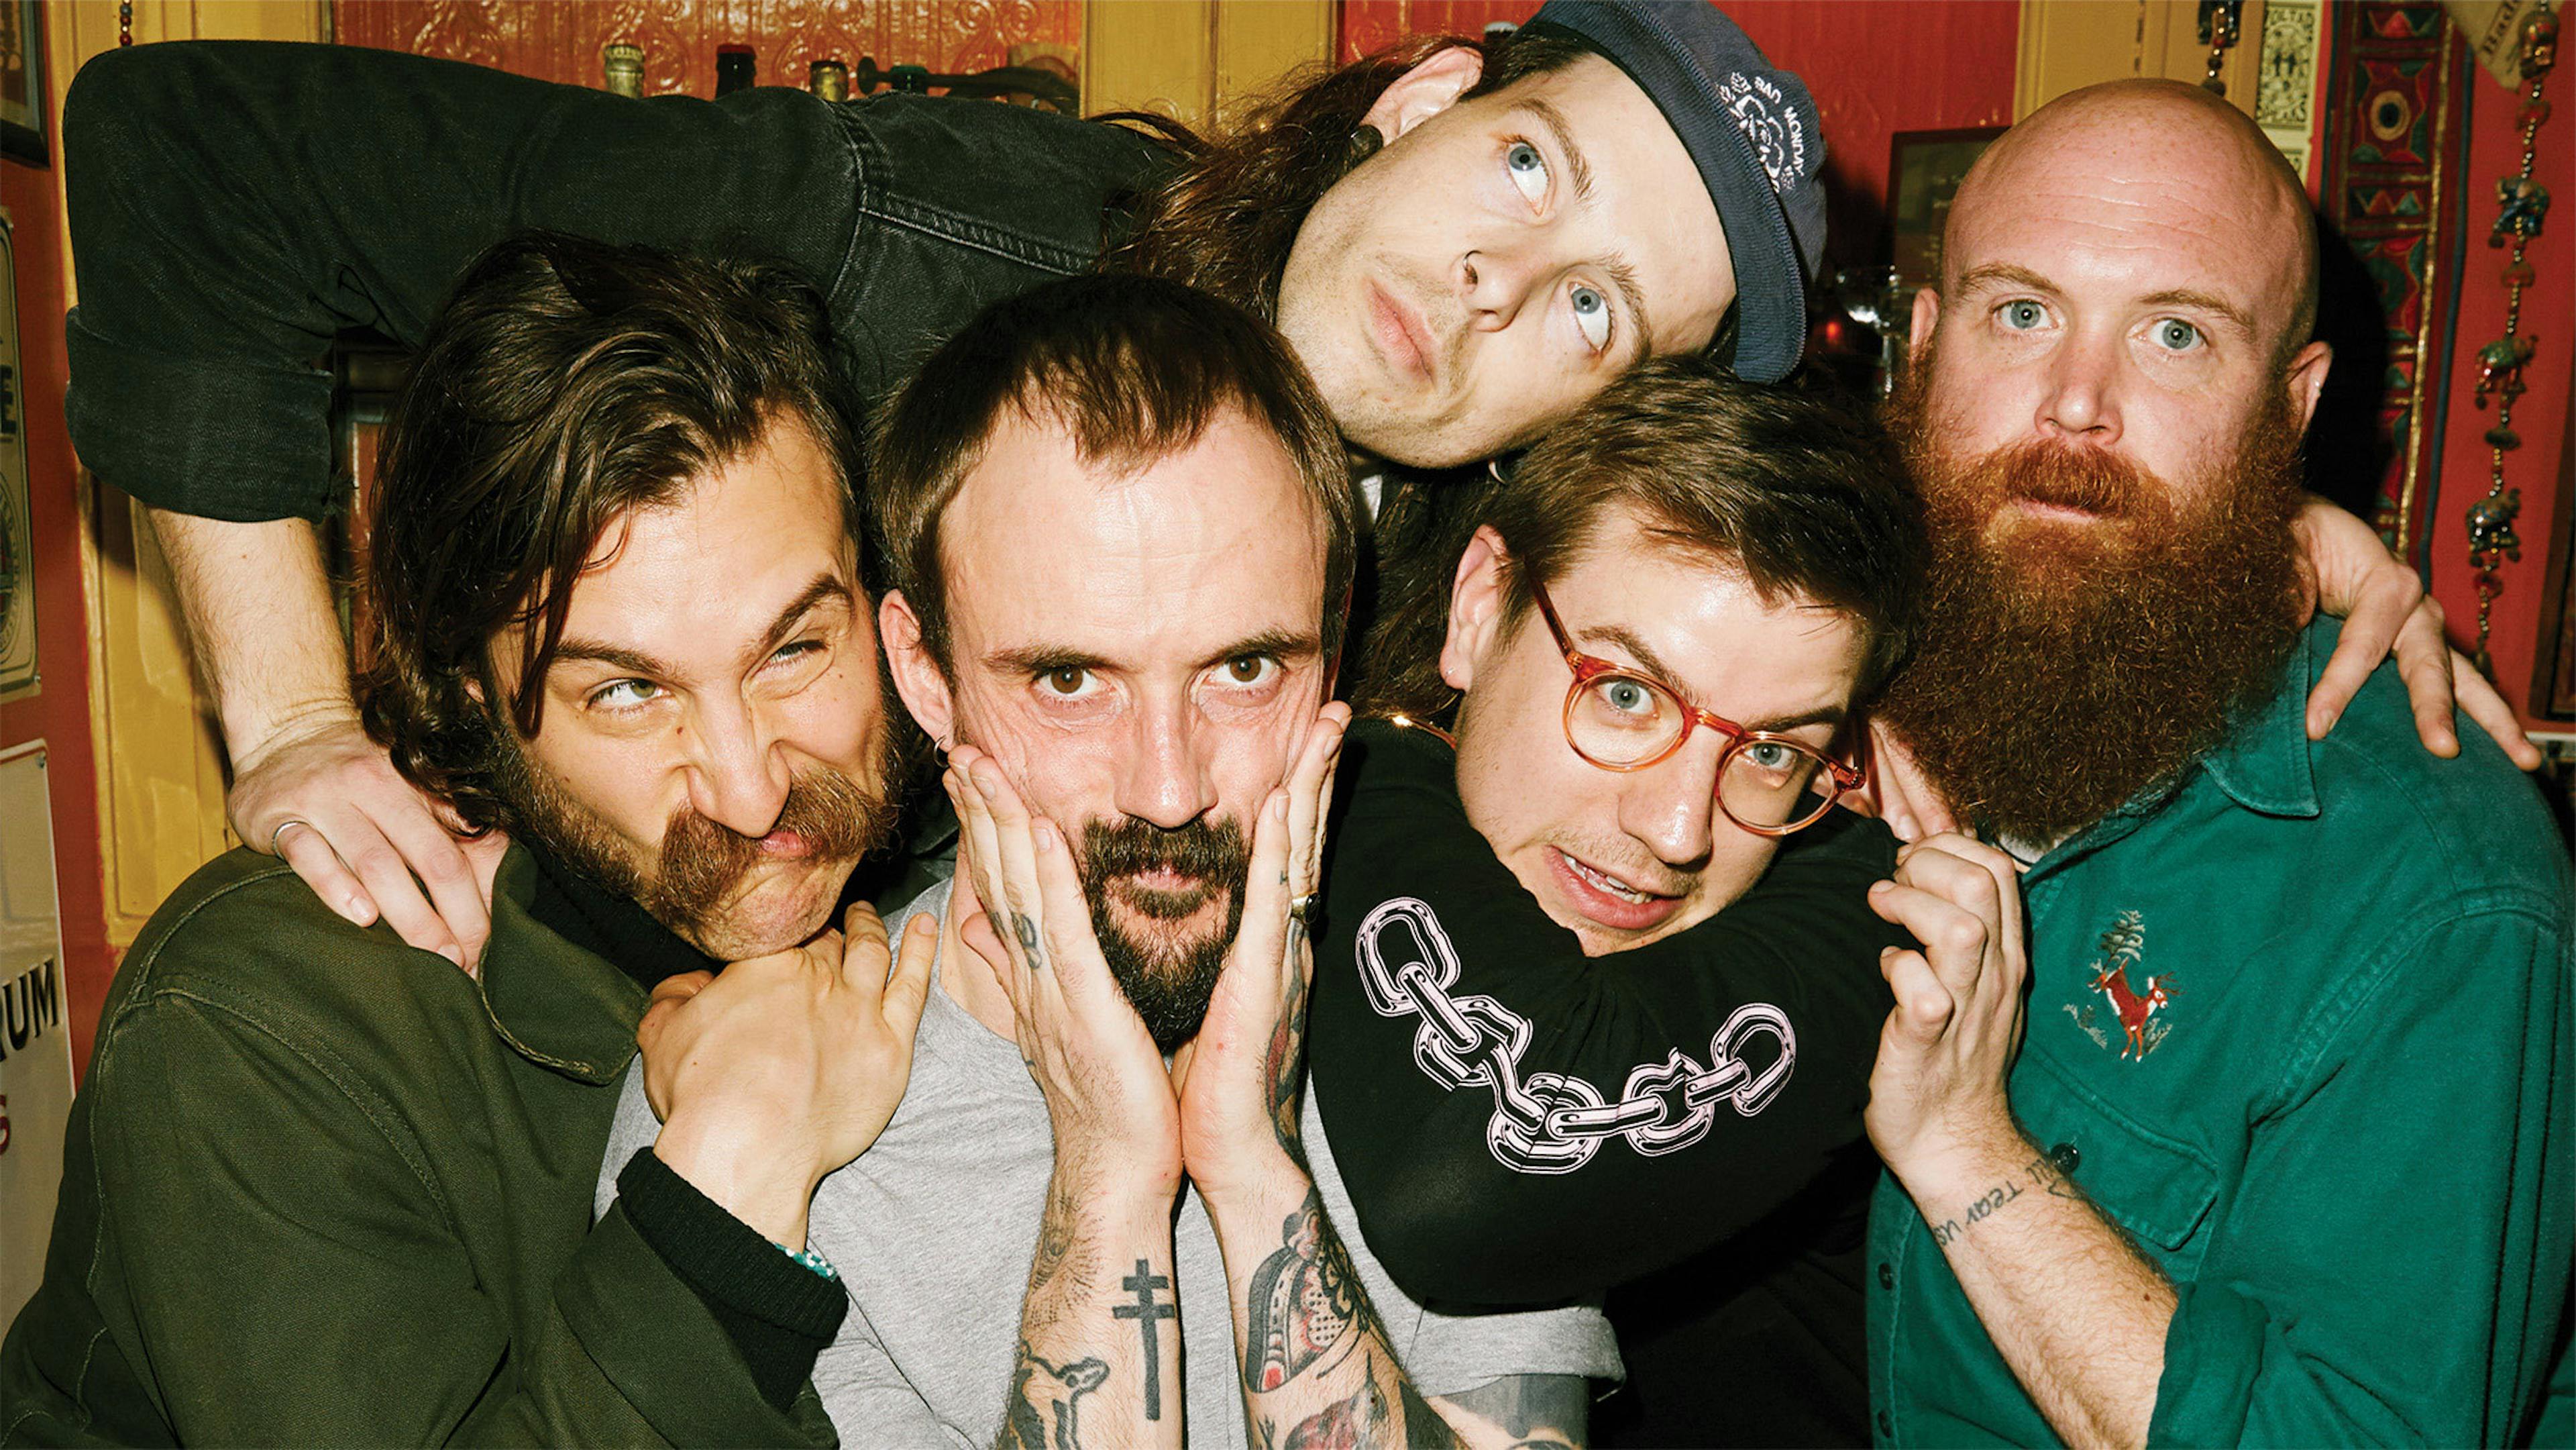 IDLES Confirm New Album: "It's Being Mixed Right Now"